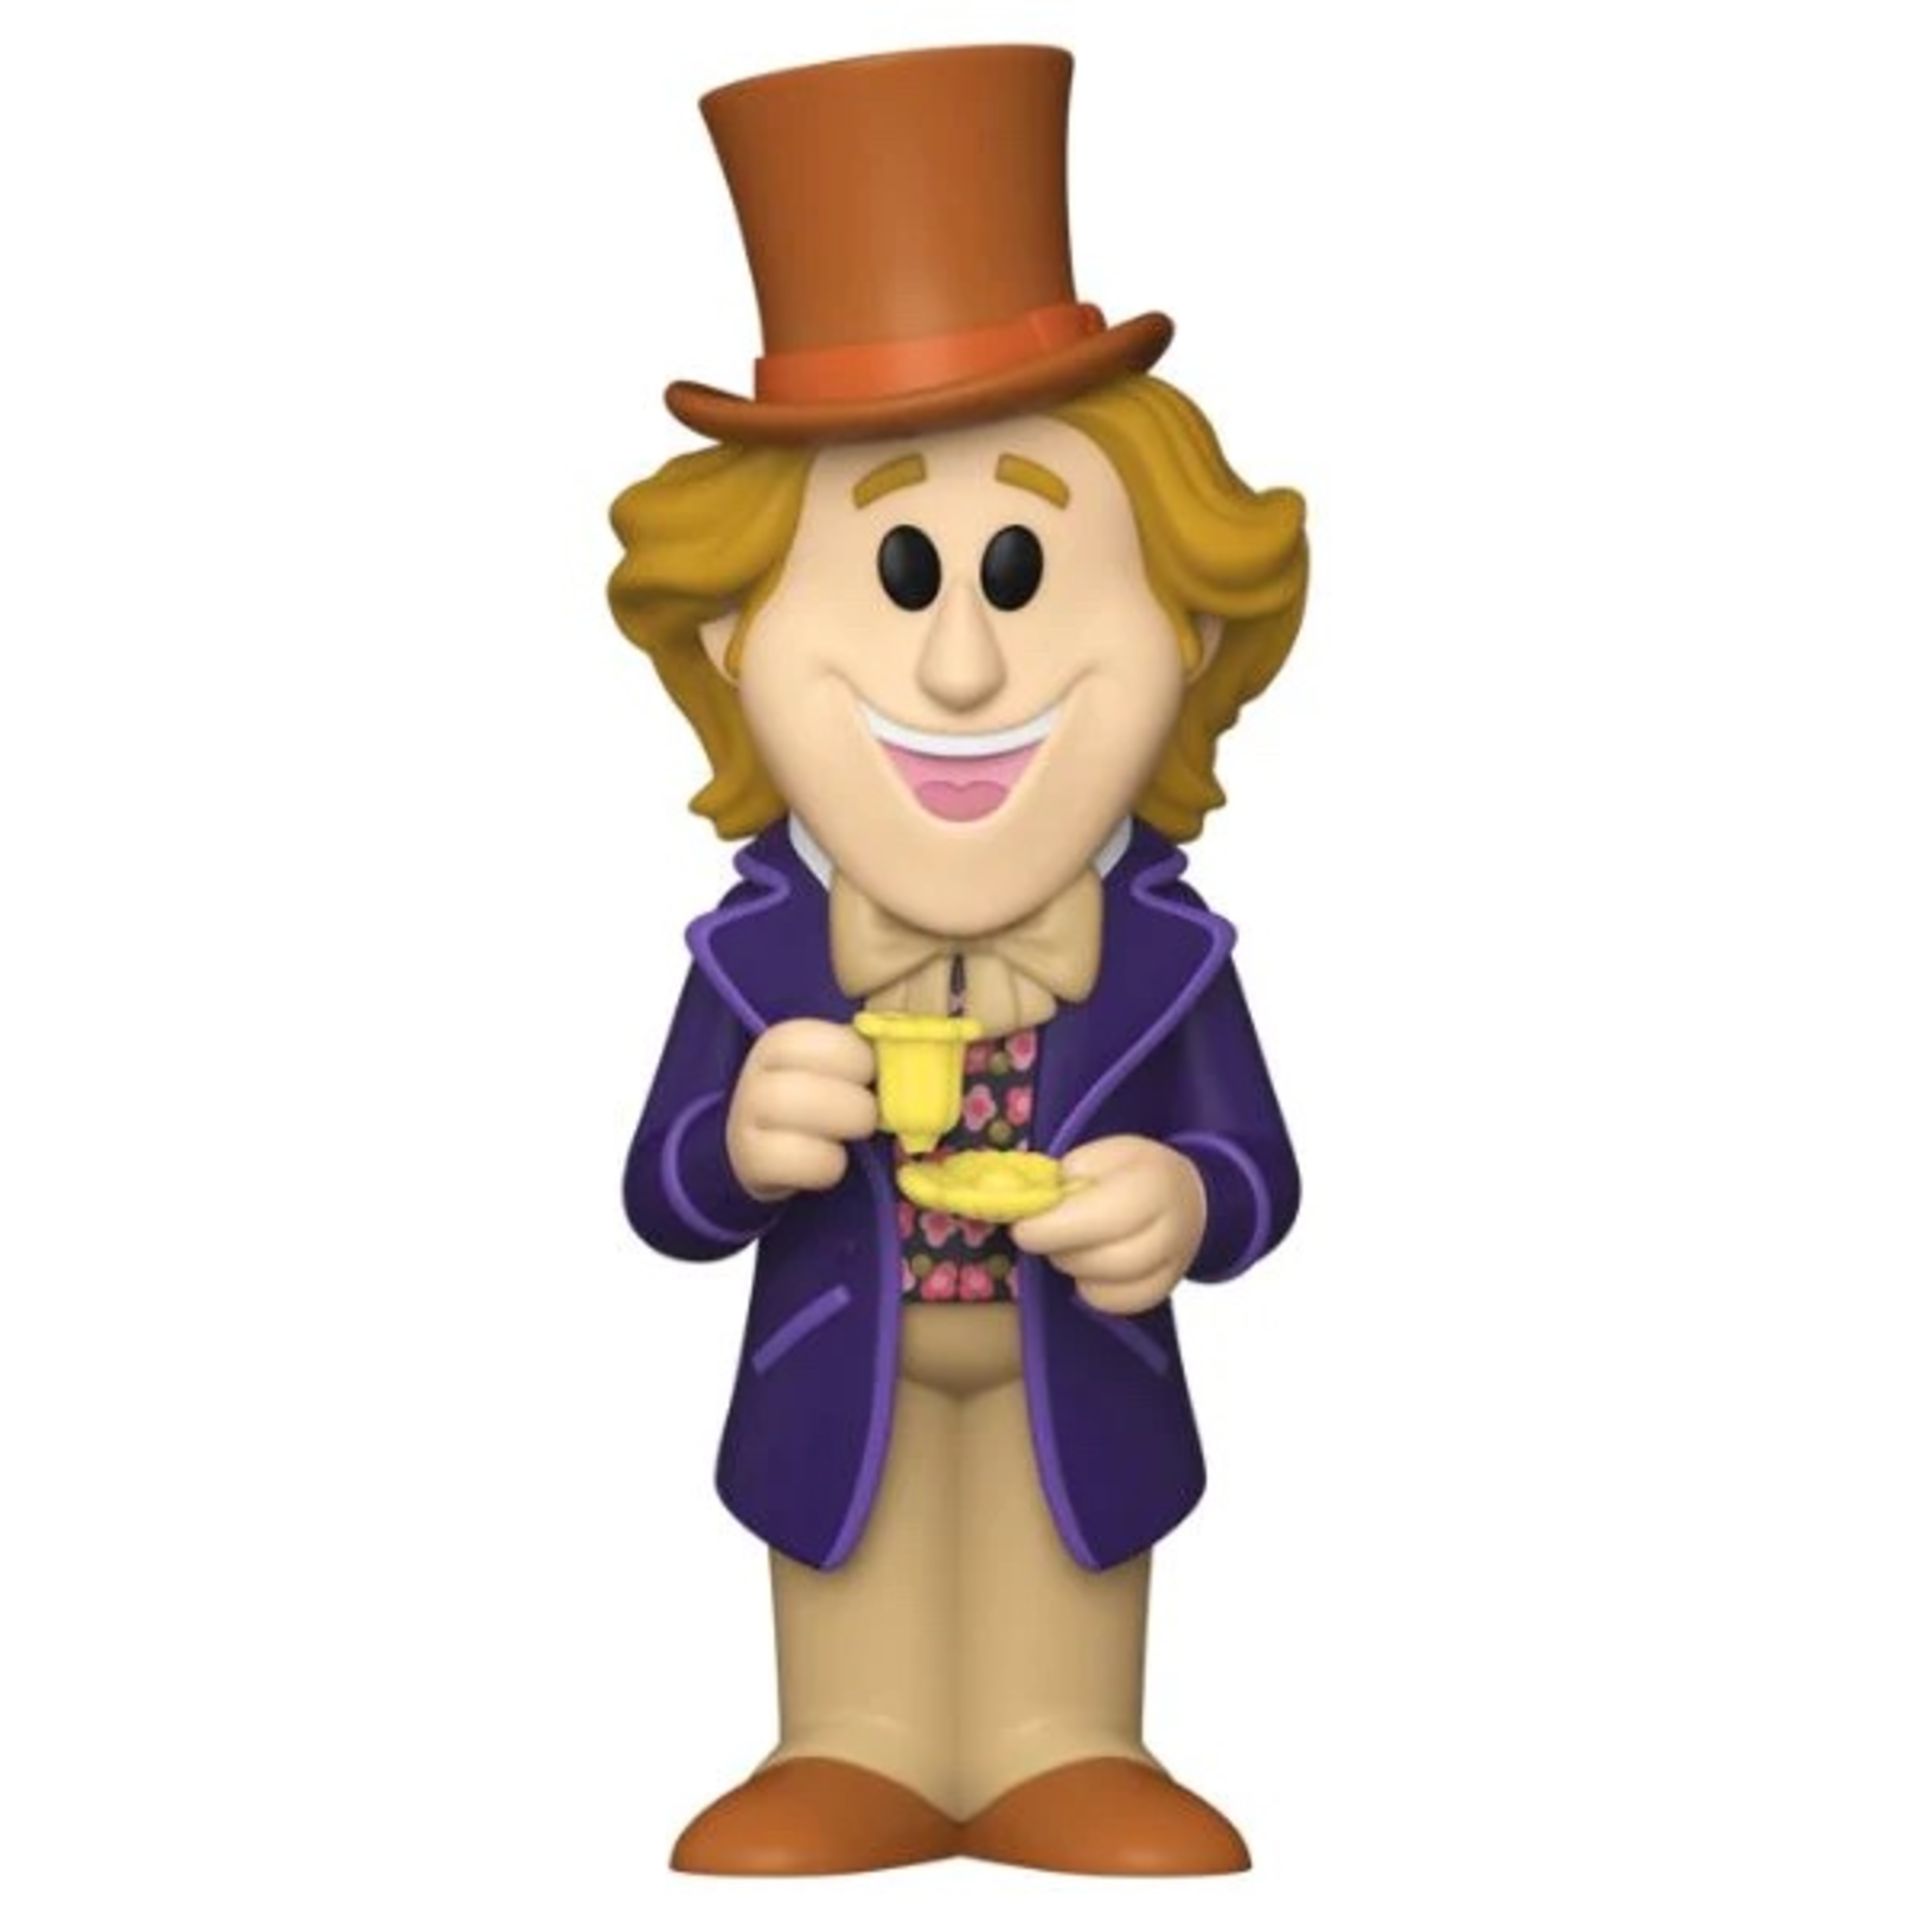 Funko Vinyl Soda â€˜Willy Wonkaâ€™ Ltd Edition Collectable - NEW & SEALED - Image 9 of 11